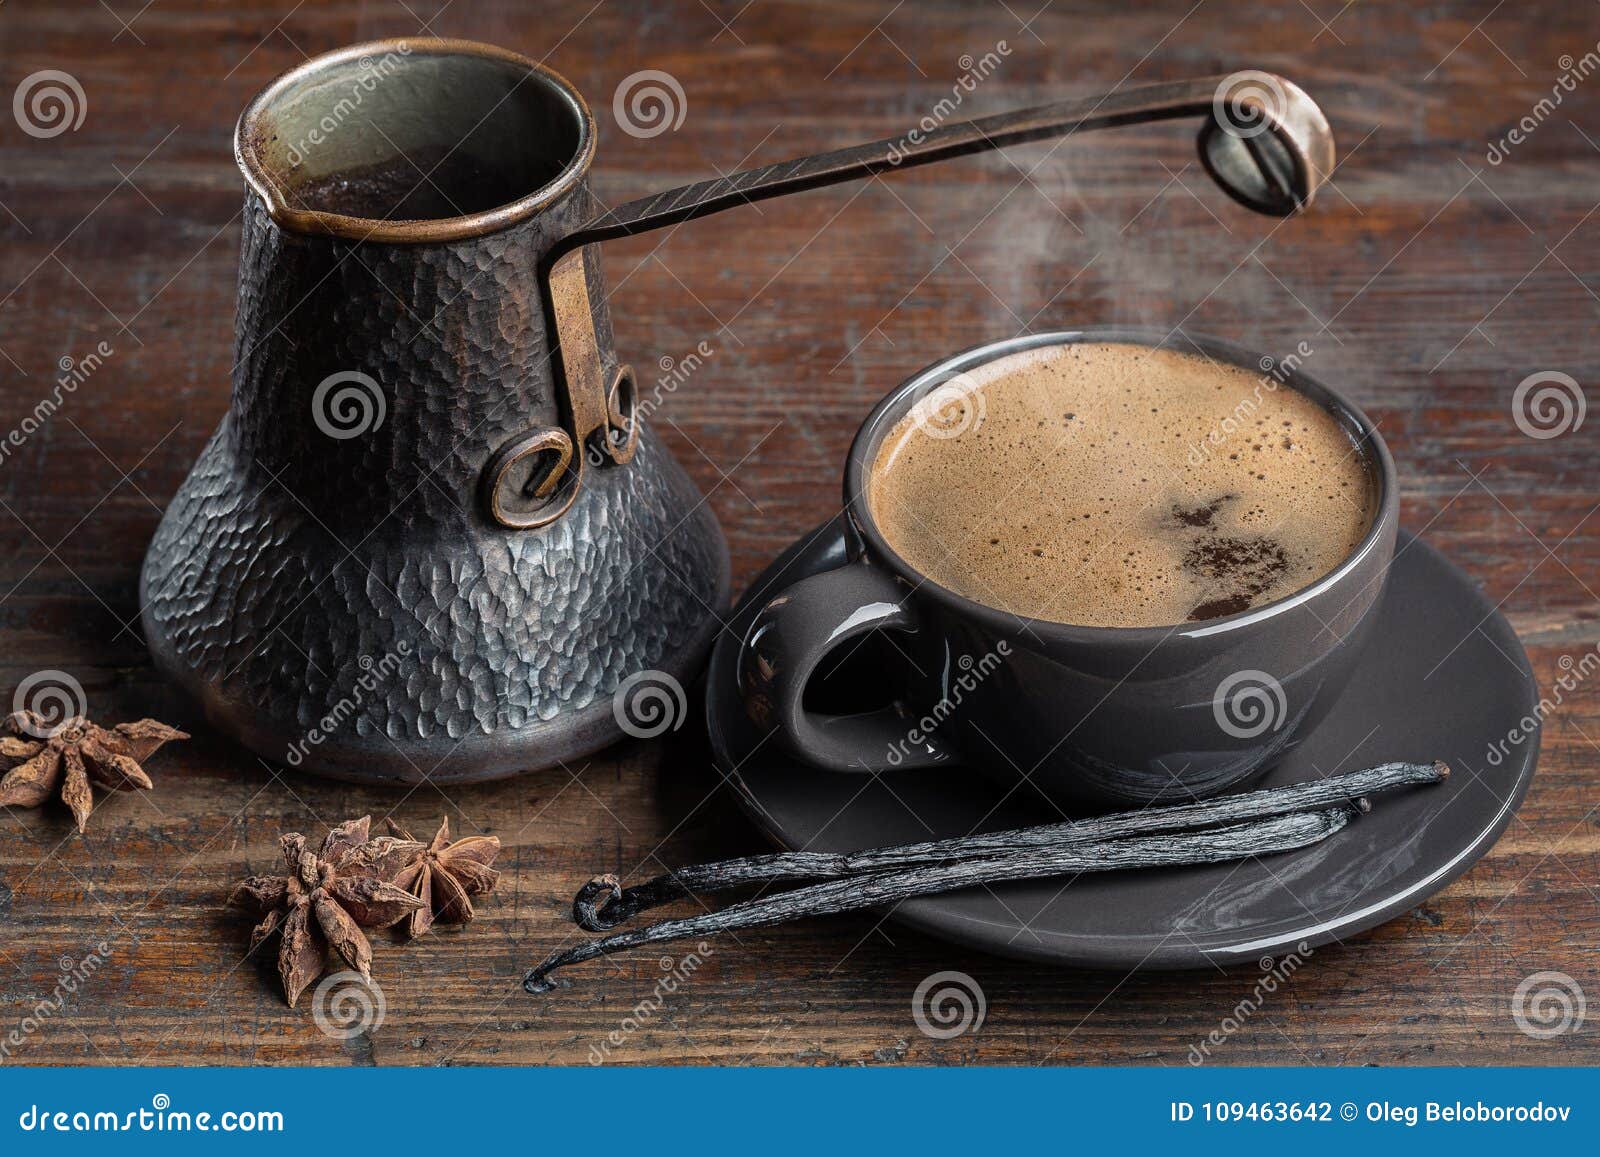 https://thumbs.dreamstime.com/z/cup-hot-coffee-vanilla-pods-vintage-coffee-pot-turka-cezve-anise-dark-wooden-table-old-coffee-pot-cup-hot-109463642.jpg